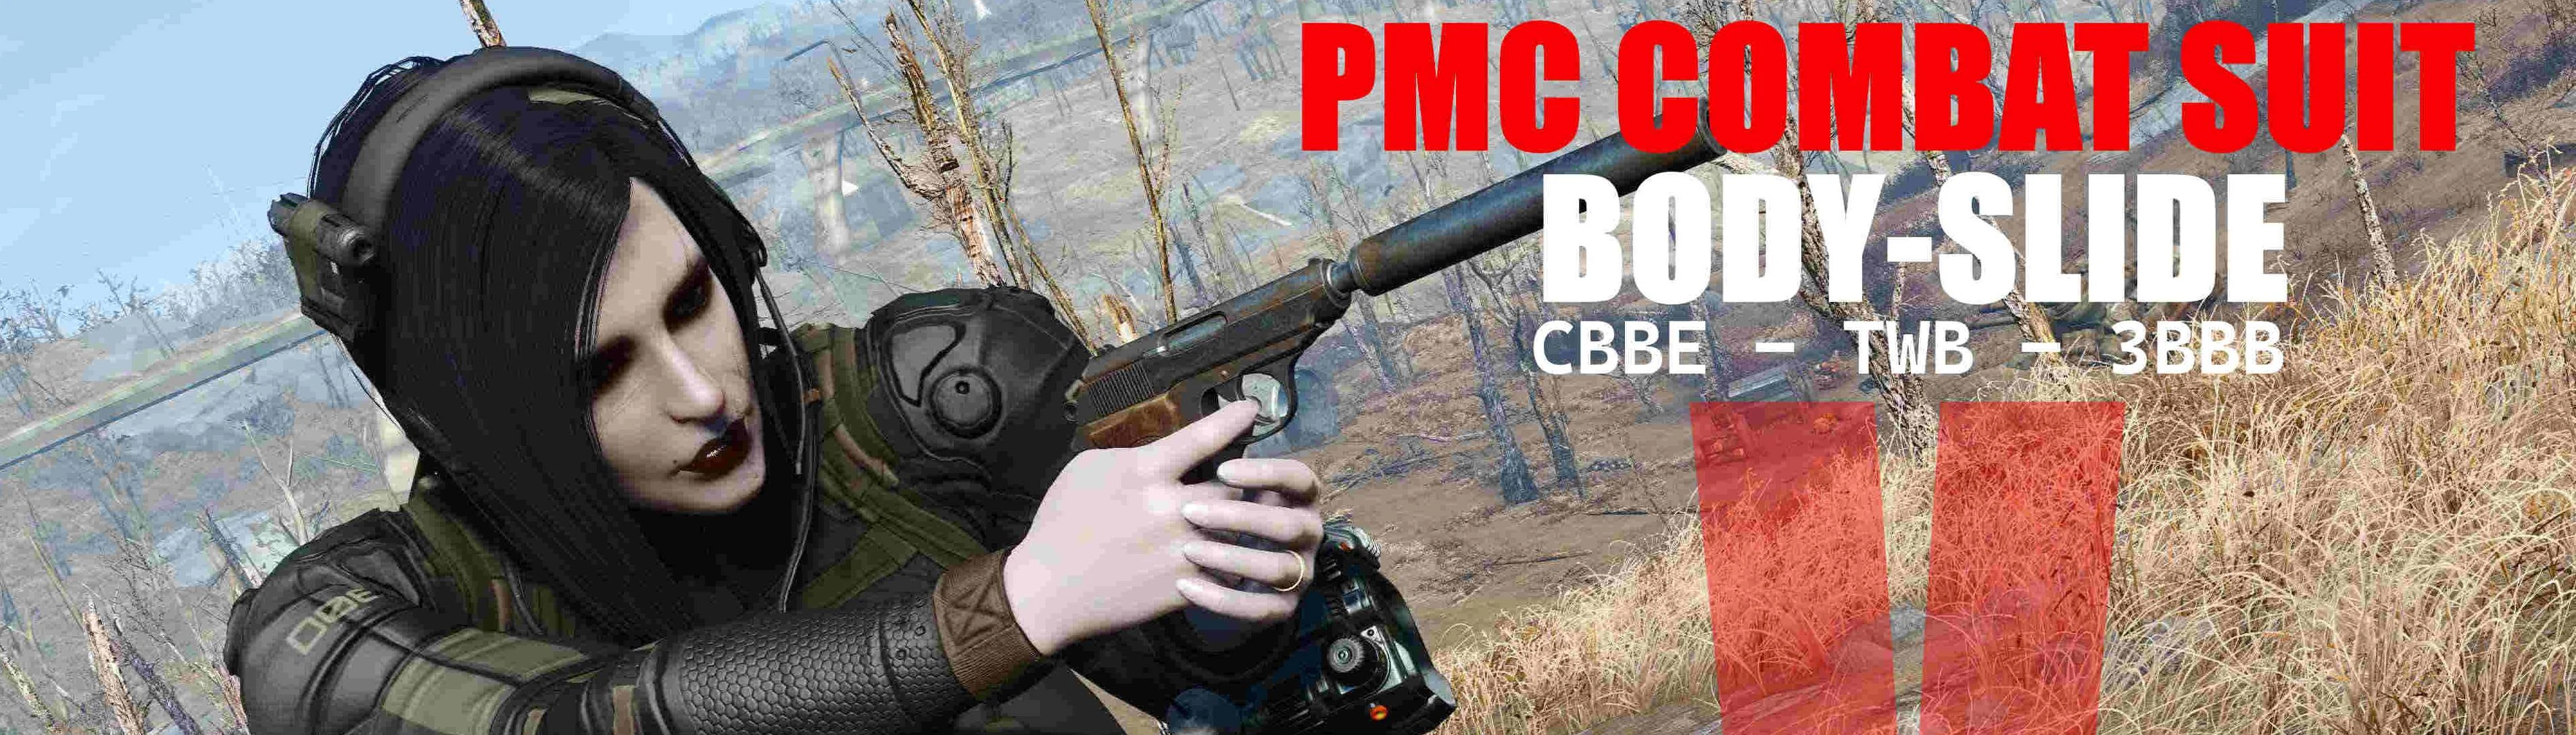 PMC Combat Suit - CBBE - TWB - 3BBB - BodySlide at Fallout 4 Nexus - Mods  and community